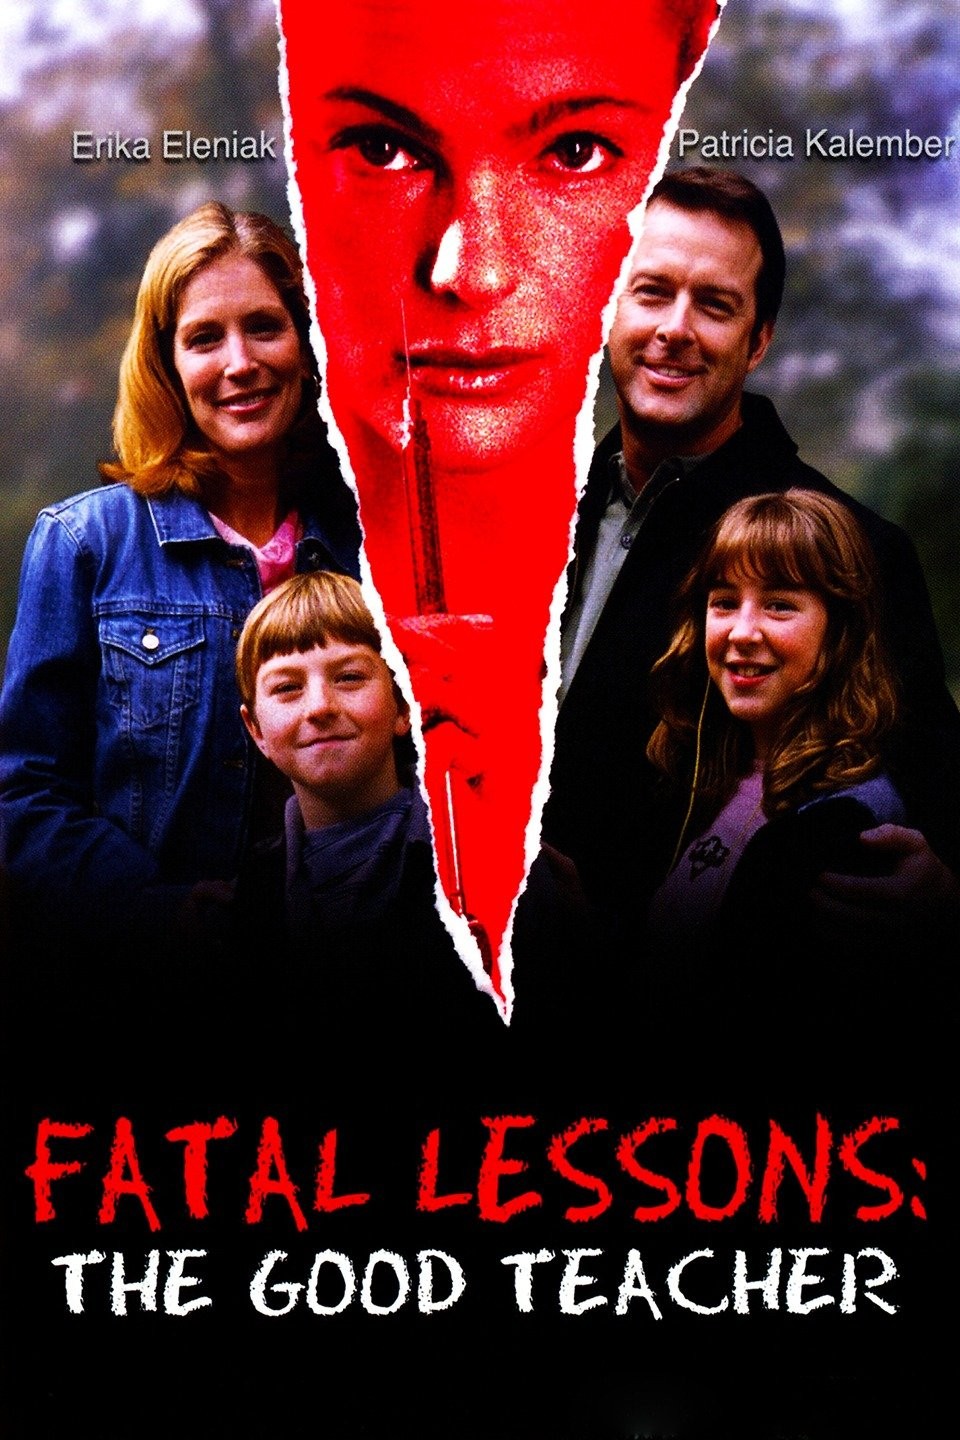 Fatal lessons this pandemic